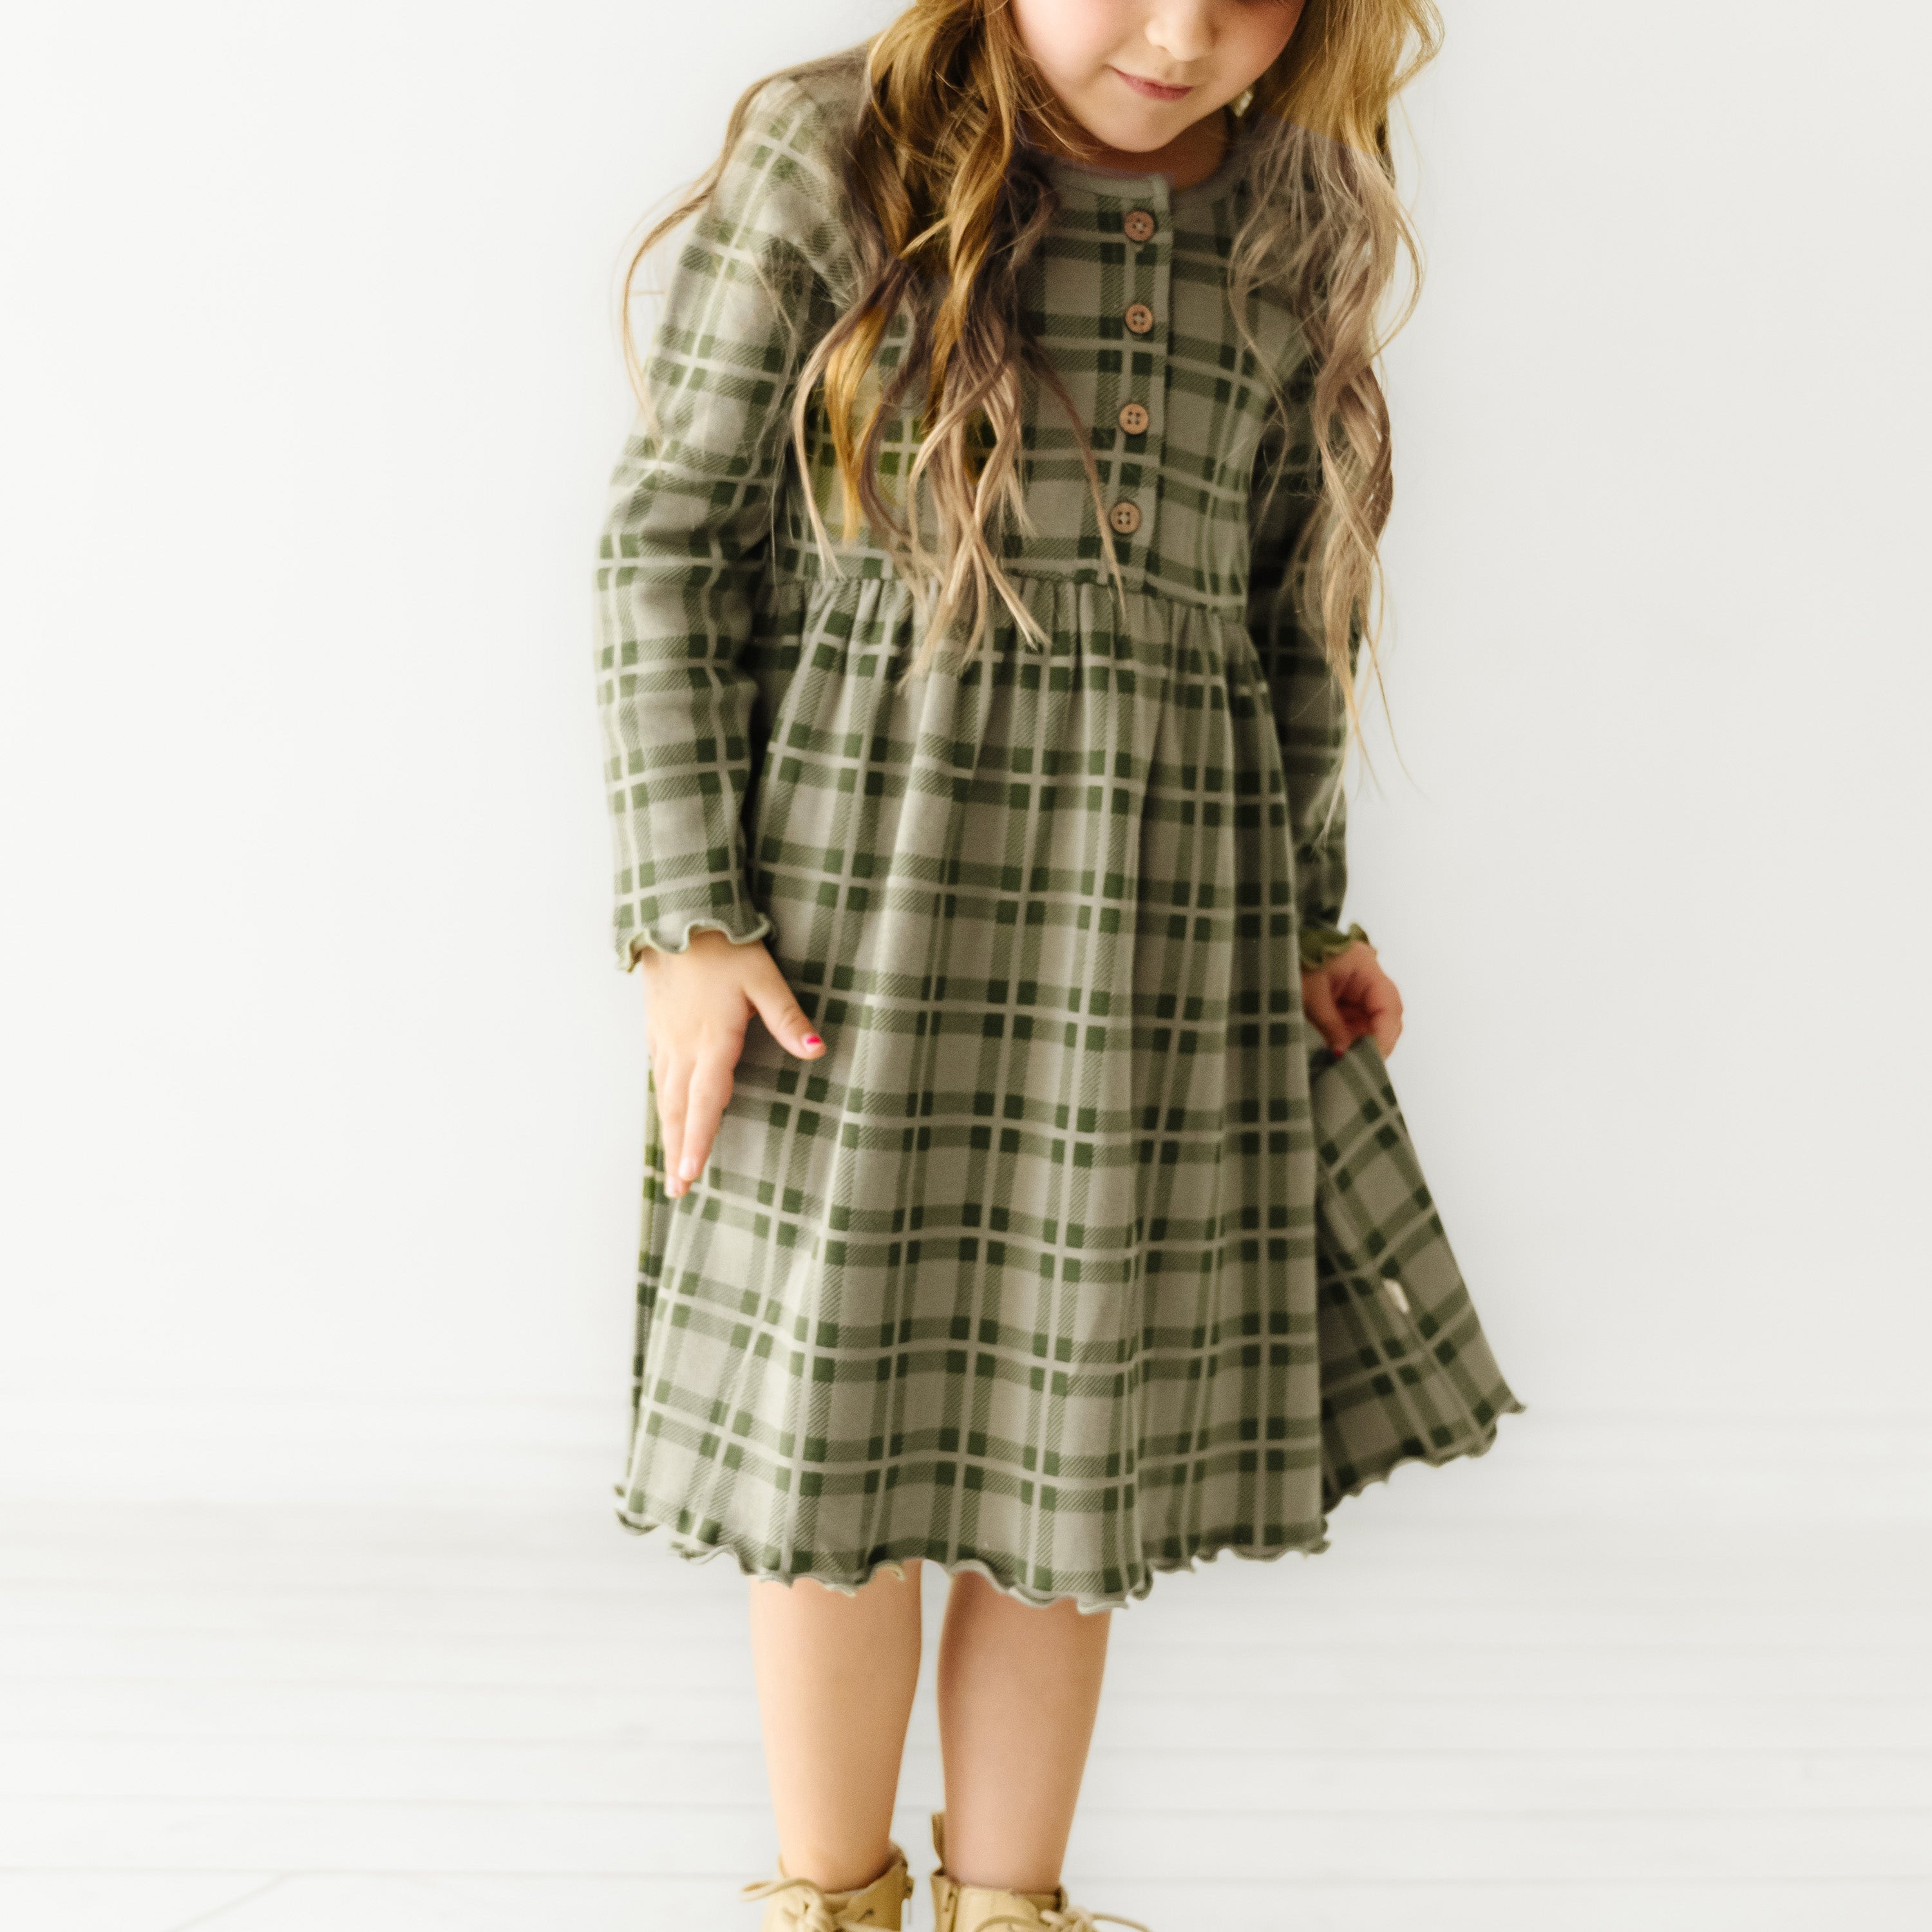 A young girl in an Organic Baby plaid green dress stands confidently, her hair in loose curls, in a bright room with a white background.